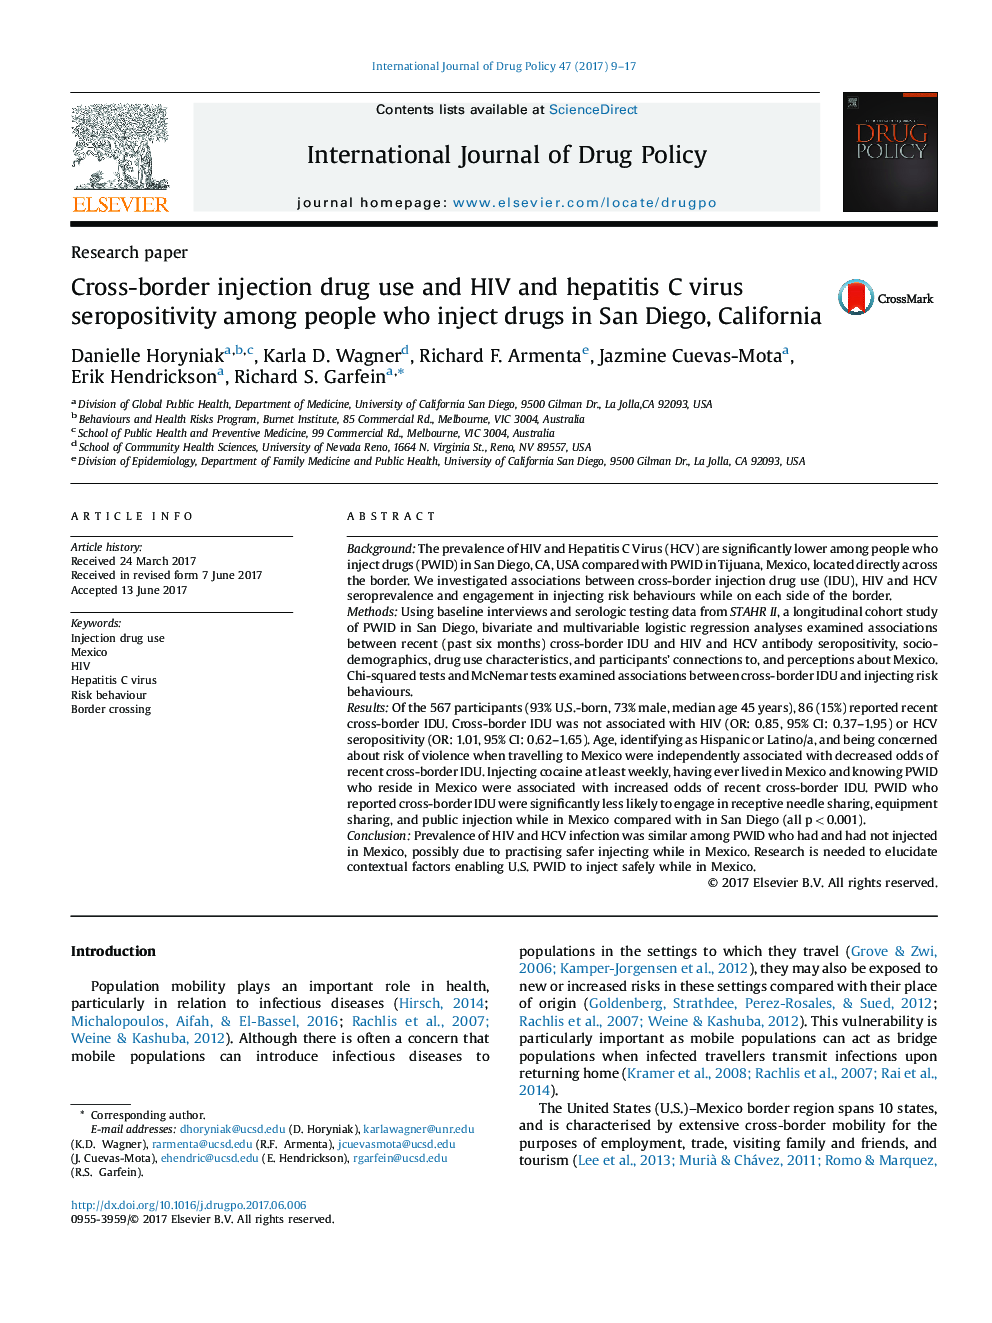 Cross-border injection drug use and HIV and hepatitis C virus seropositivity among people who inject drugs in San Diego, California